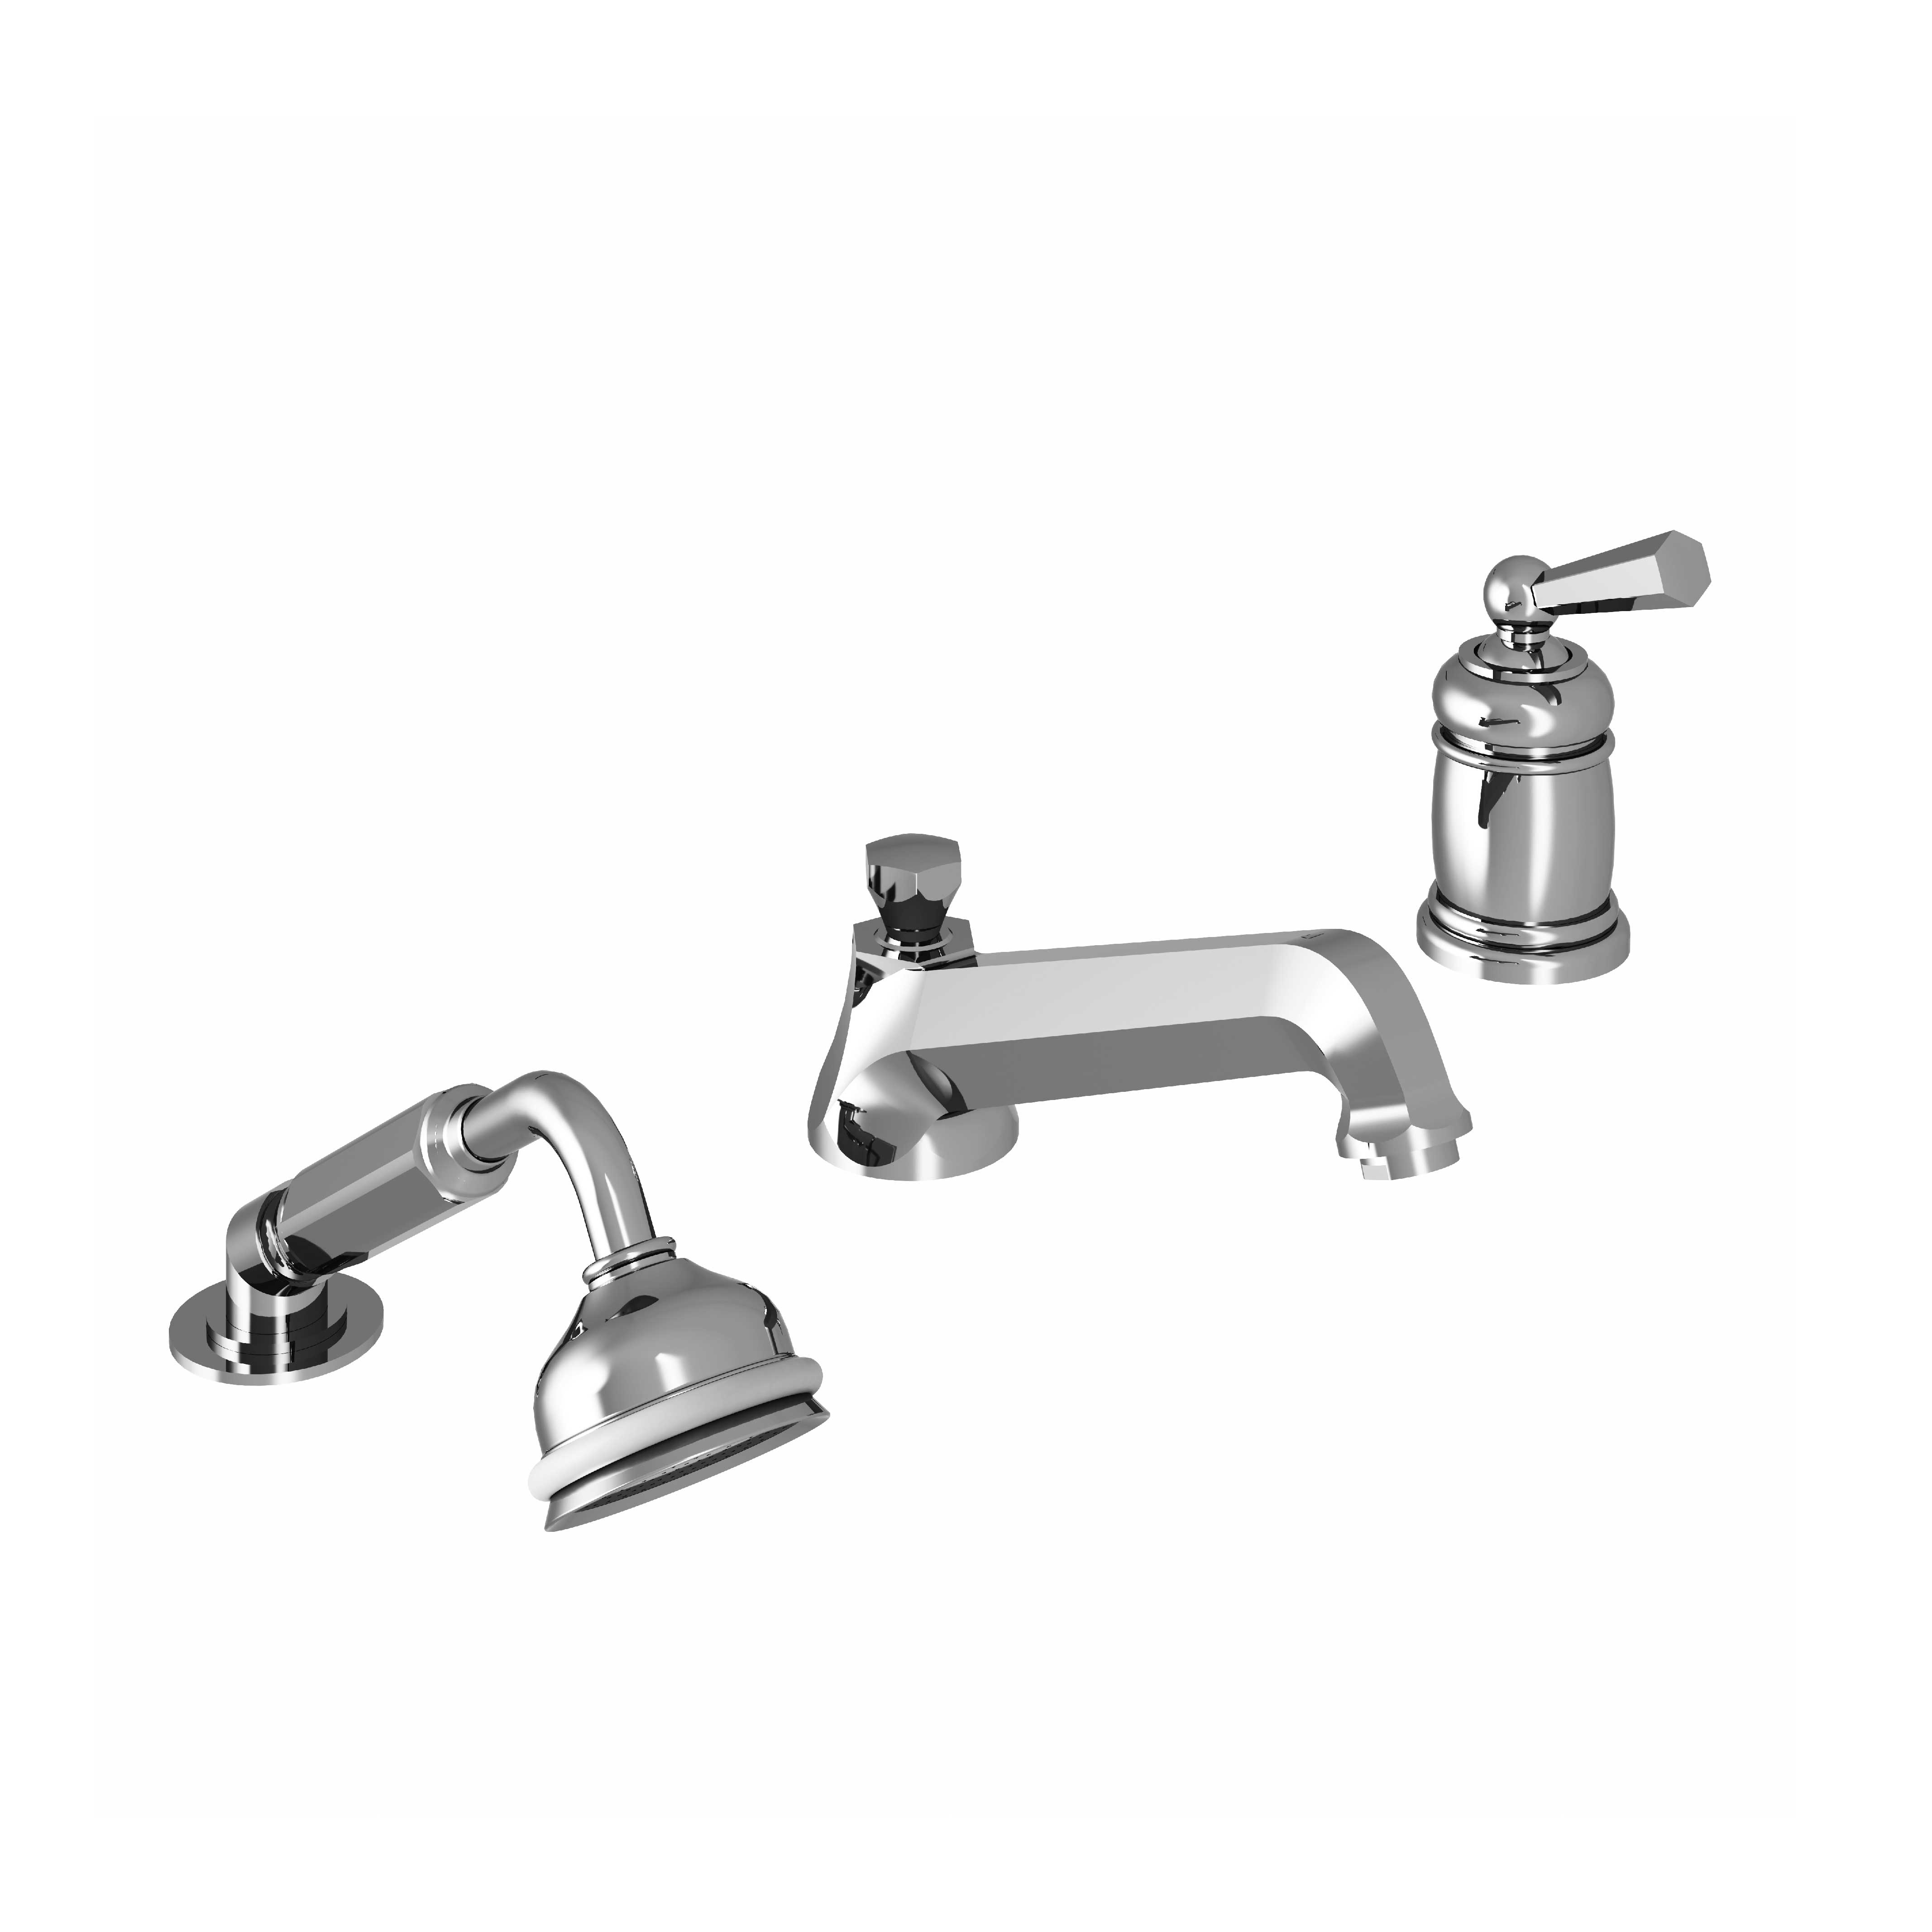 M38-3301M 3-hole single-lever bath and shower mixer